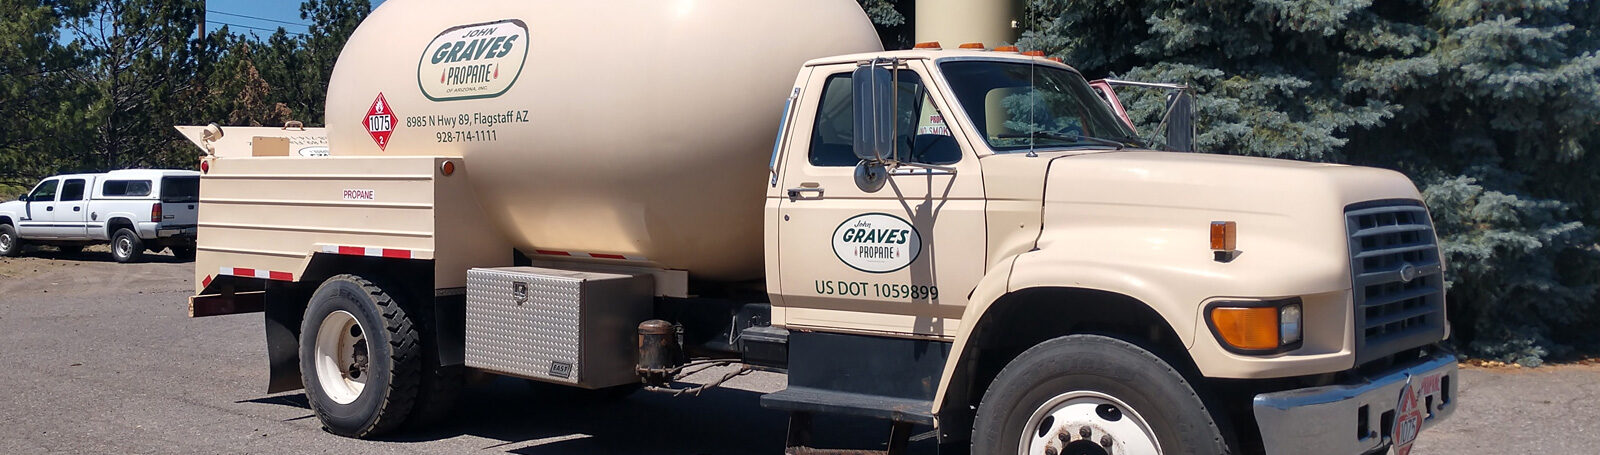 We deliver propane services to Camp Verde, Flagstaff and Golden Valley